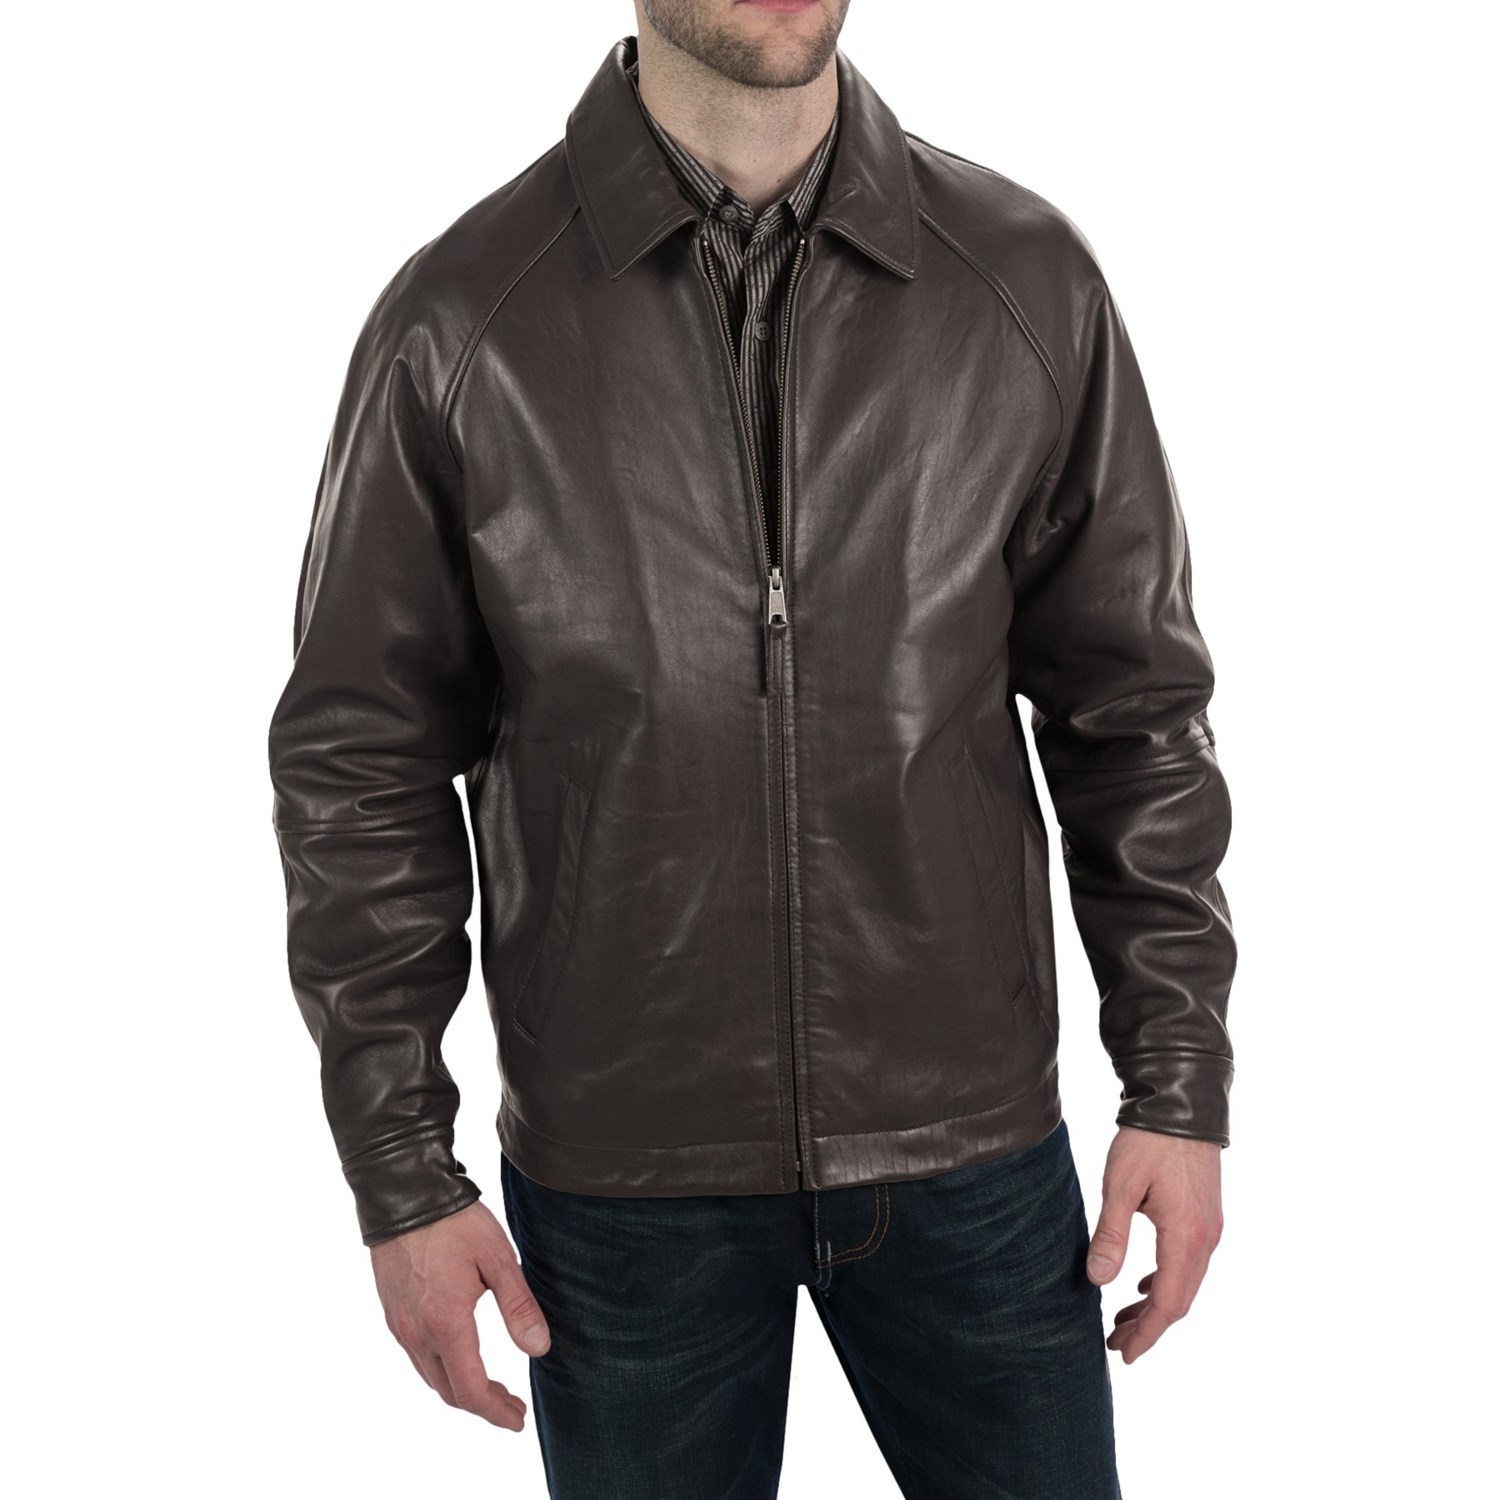 Golden Bear The Montgomery Jacket - Lambskin Leather (For Men) - Save 42%